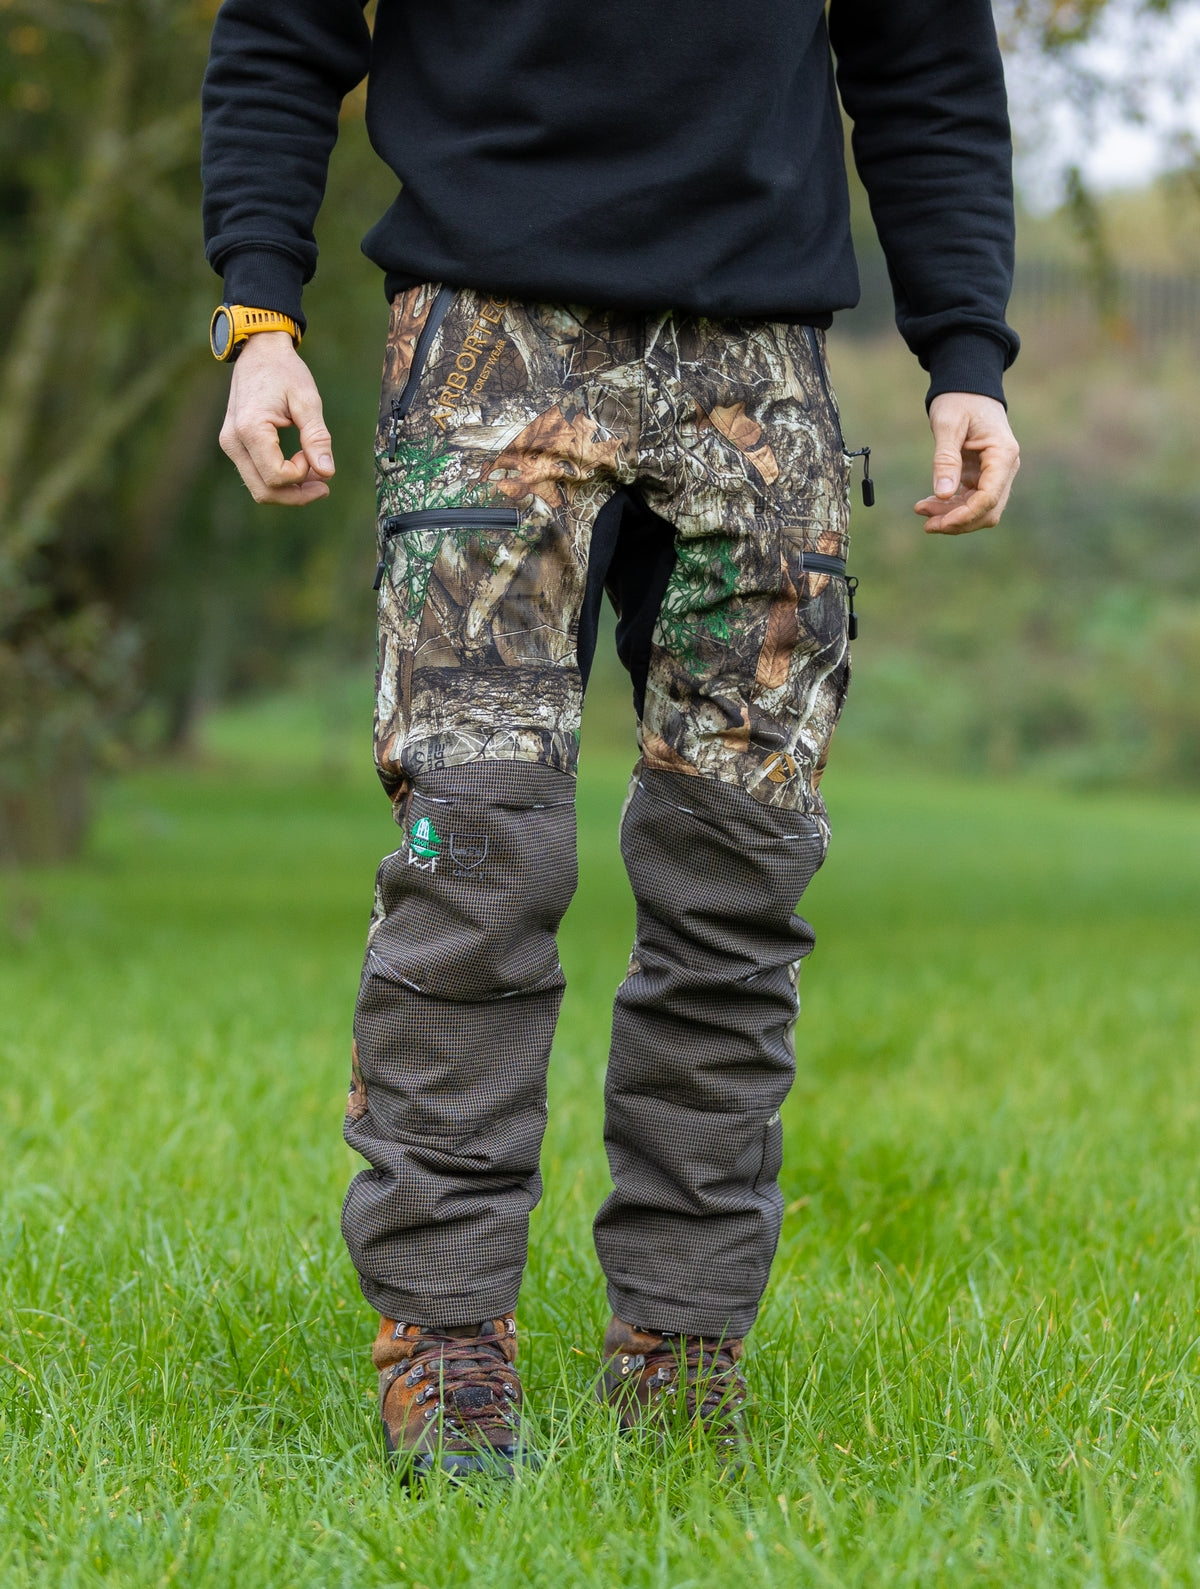 AT4070 - Breatheflex Pro Realtree Chainsaw Trousers Design C/Class 1 - Brown